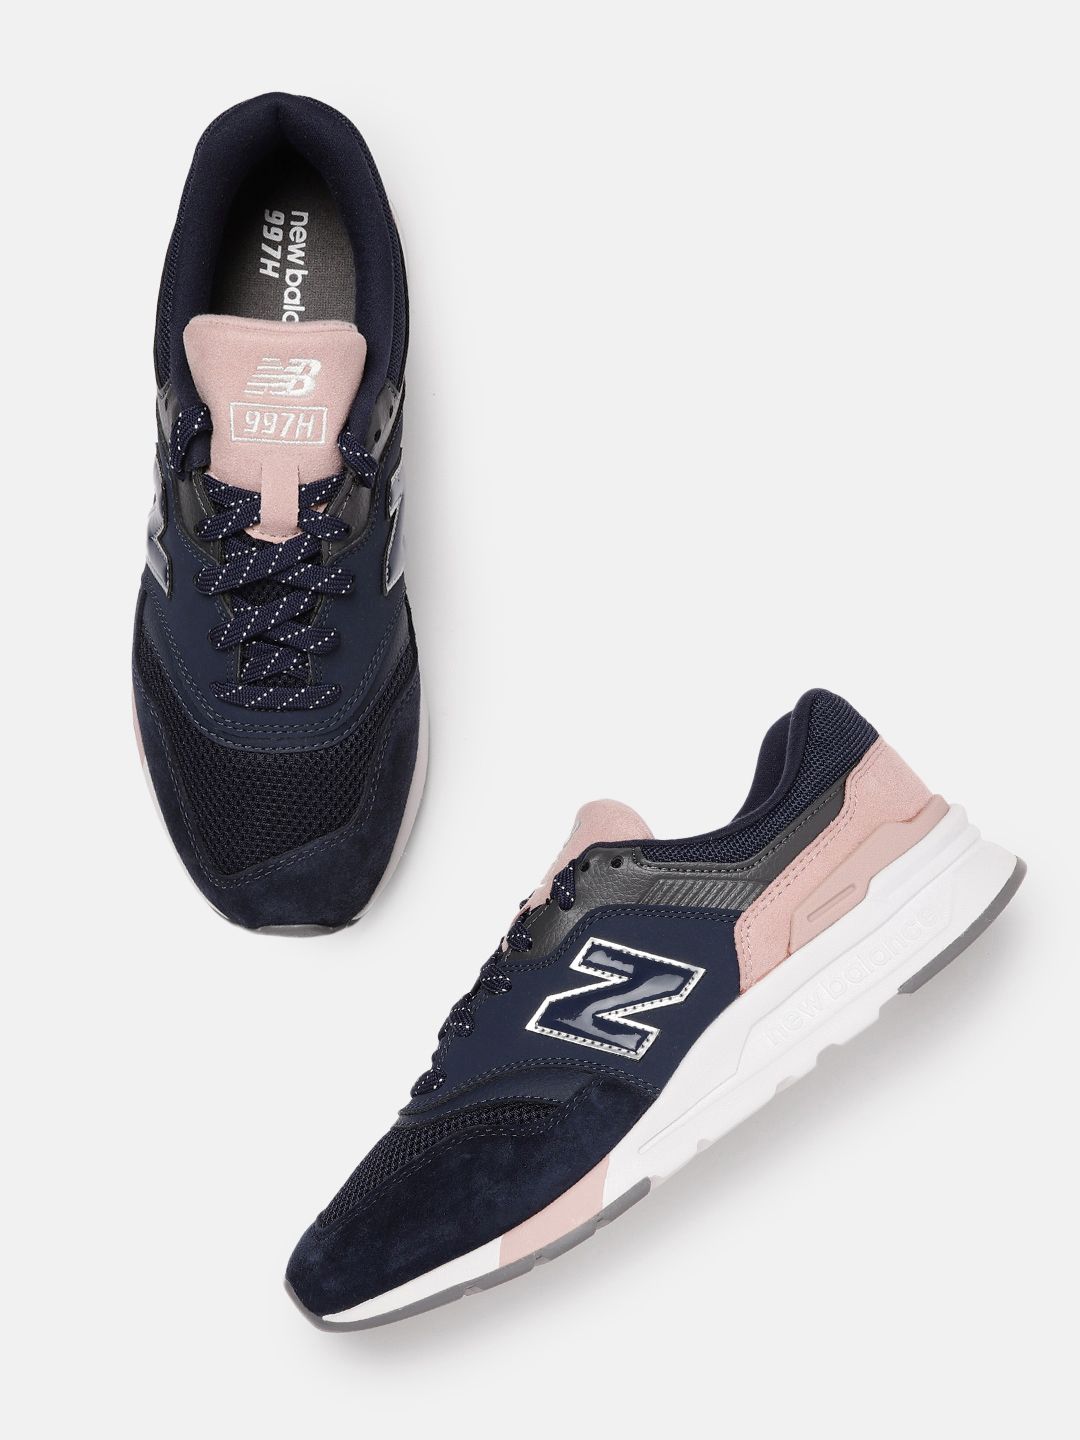 New Balance Women Navy Blue Woven Design Sneakers Price in India